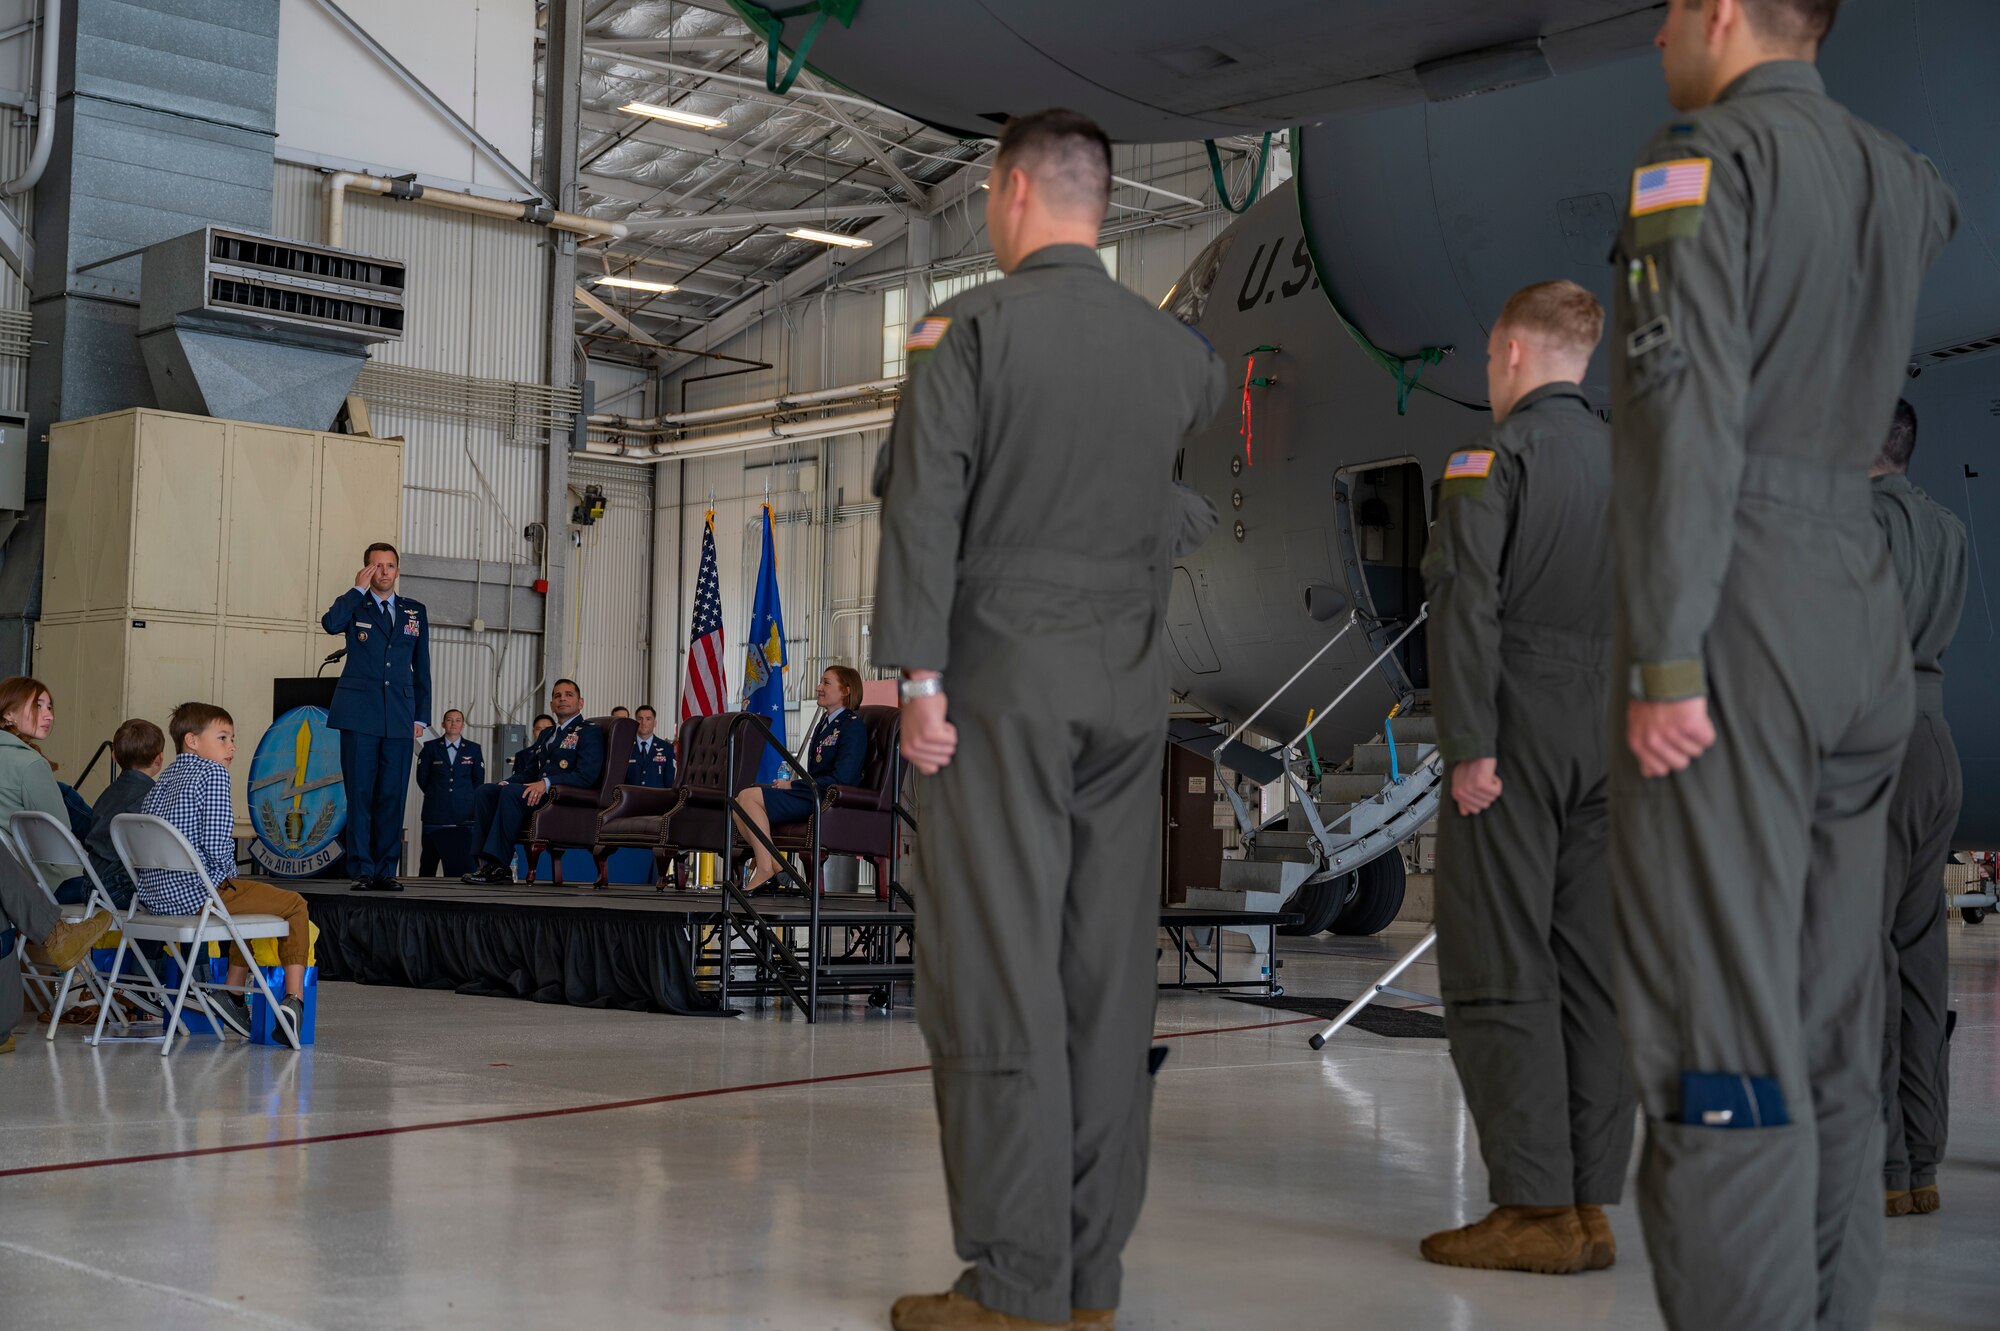 U.S. Air Force Lt. Col. Brandon Westling, incoming commander of the 7th Airlift Squadron, gives remarks during the change of command ceremony at Joint Base Lewis-McChord, Washington, June 16, 2022. Aircrews of the 7th AS operate the C-17 Globemaster III aircraft, directly supporting numerous U.S. government agencies and international forces in global operations ranging from troop airlift/airdrop to lifesaving medevac and humanitarian/disaster relief. (U.S. Air Force photo by Airman 1st Class Charles Casner)